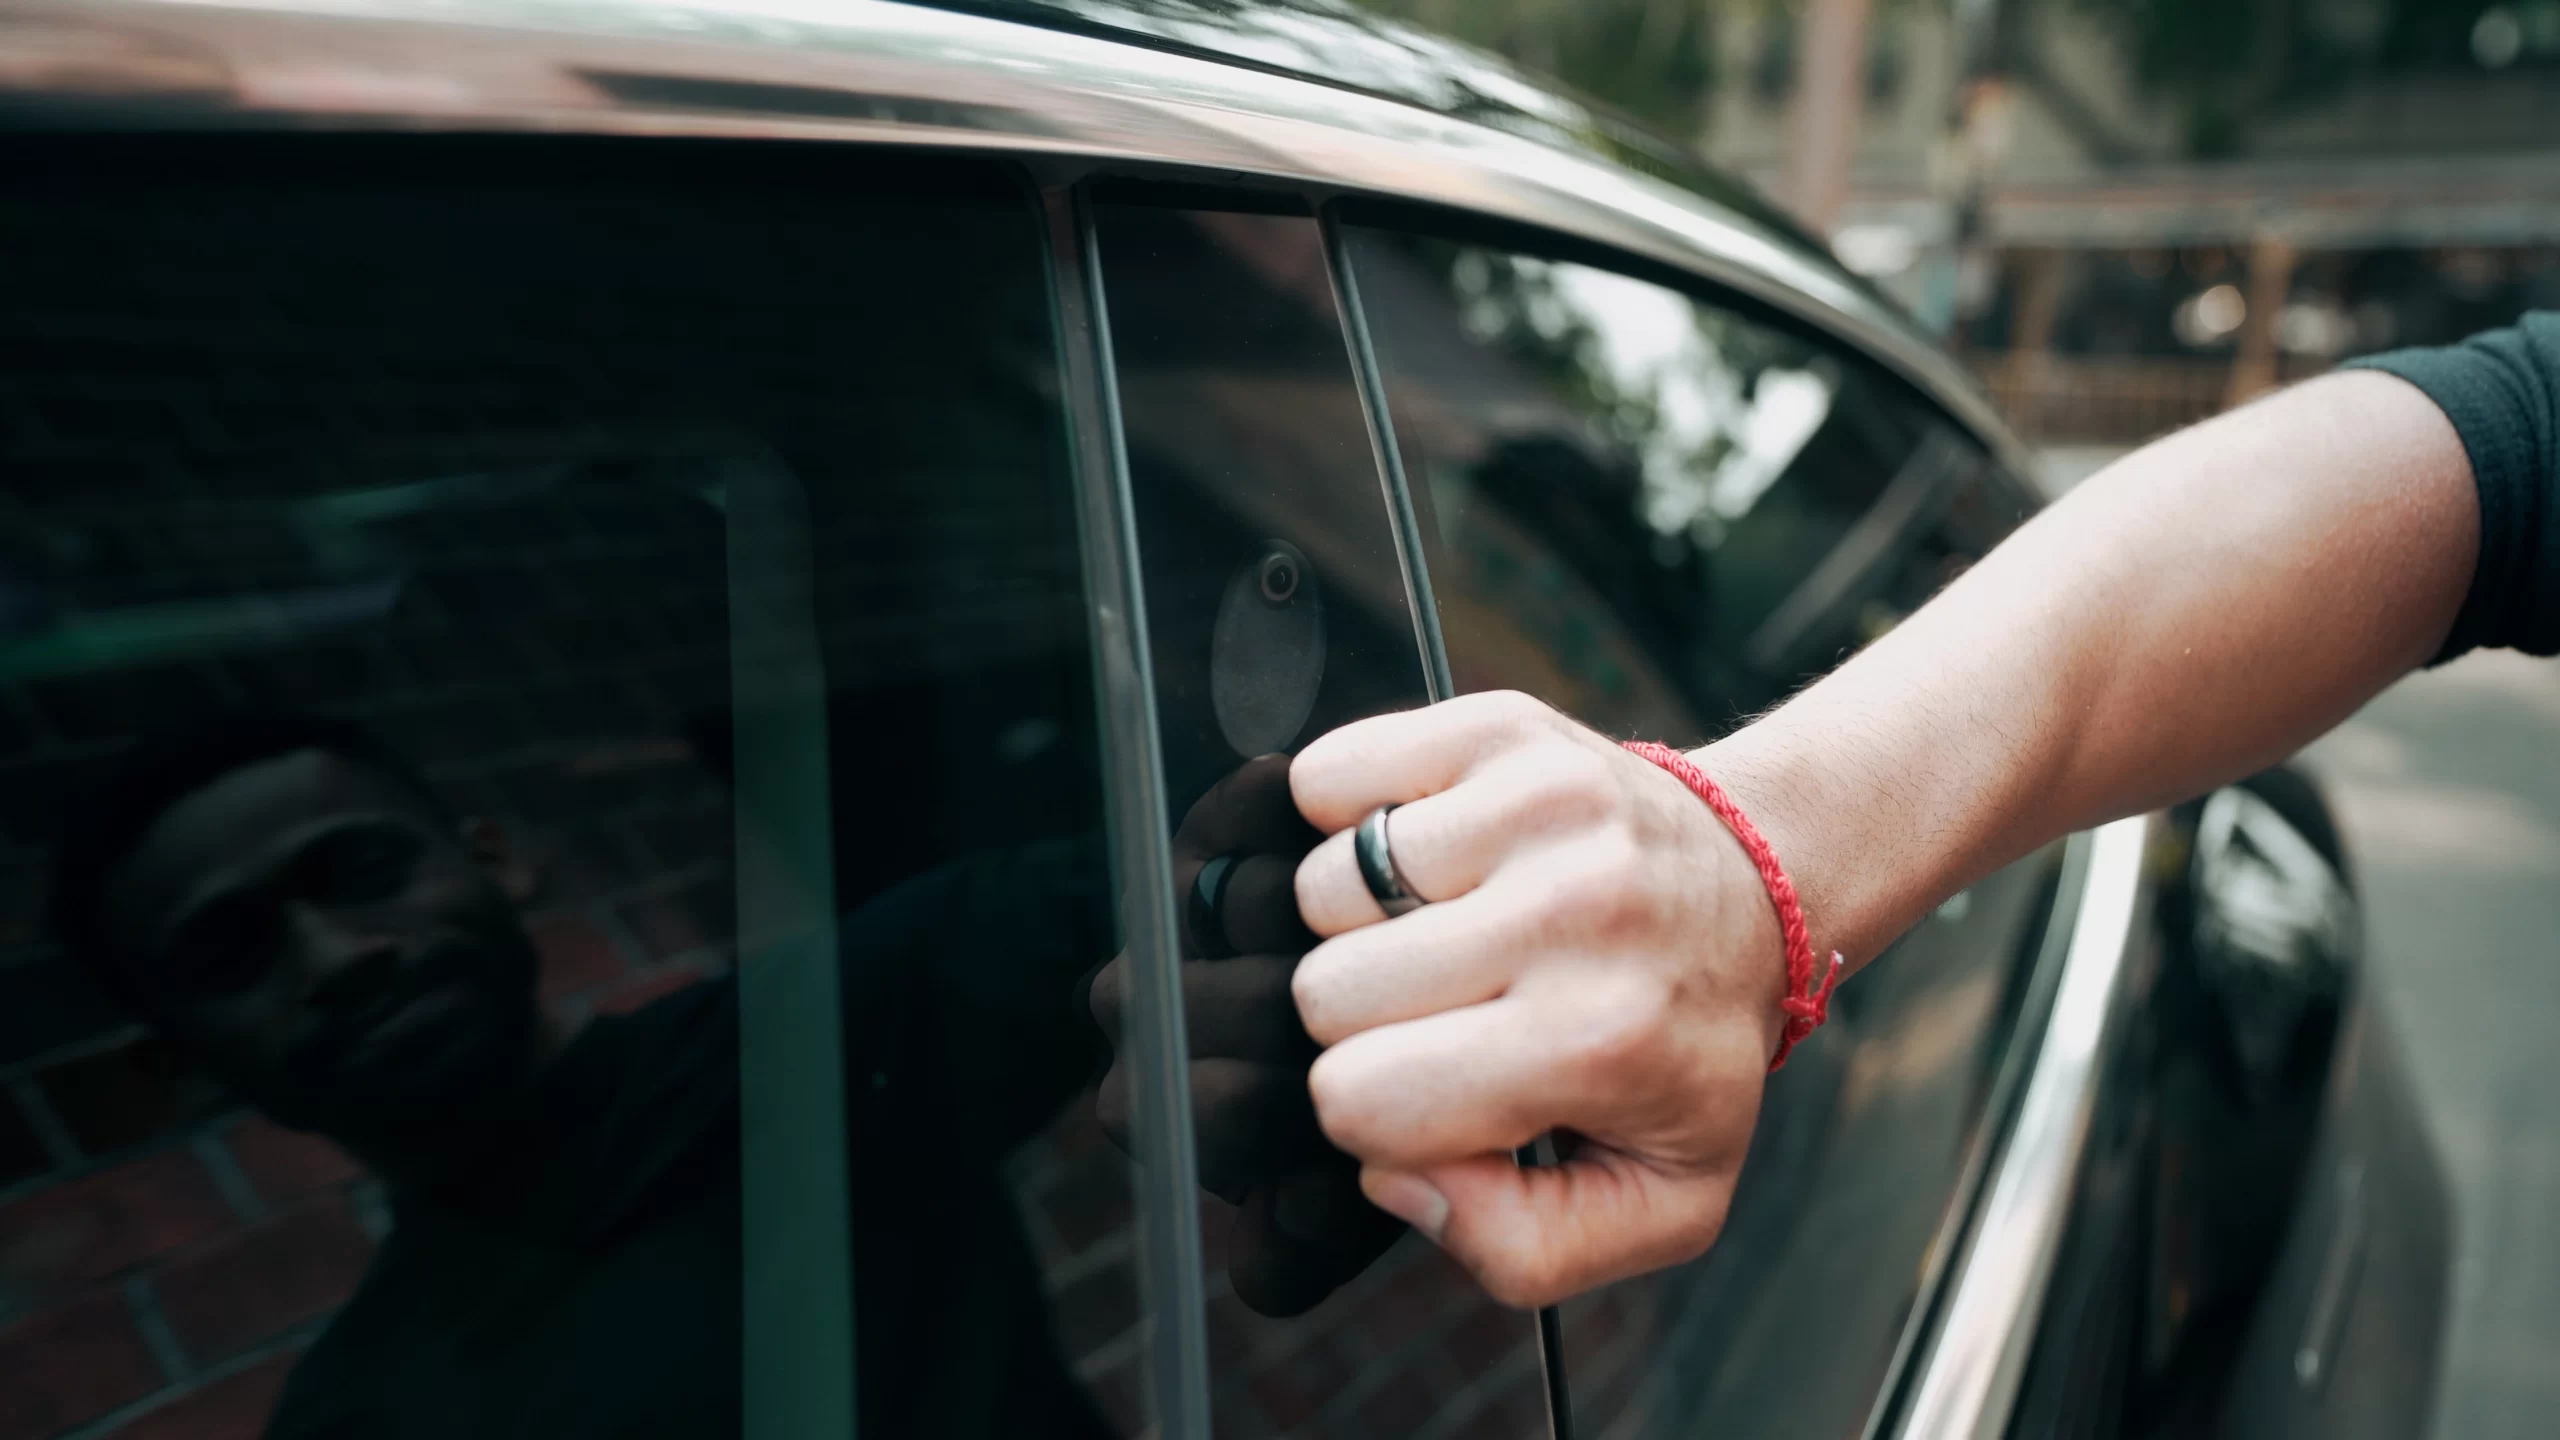 Hand of a man wearing the Apex Ring, knocking on a Tesla